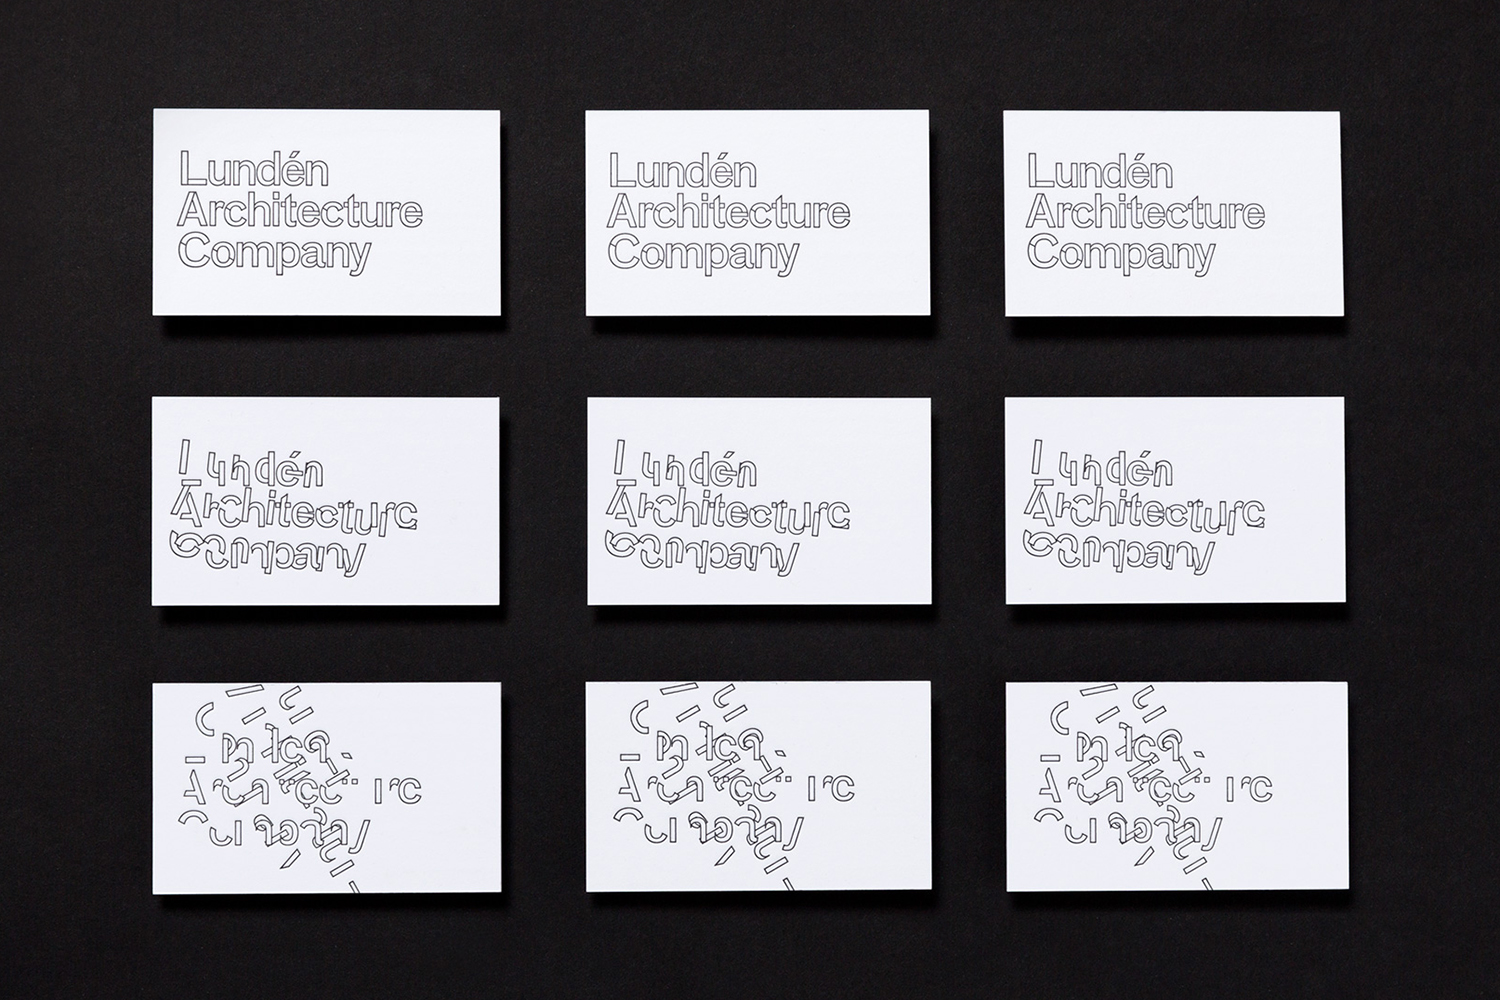 Architect Business Cards – Lundén Architecture Company by Tsto